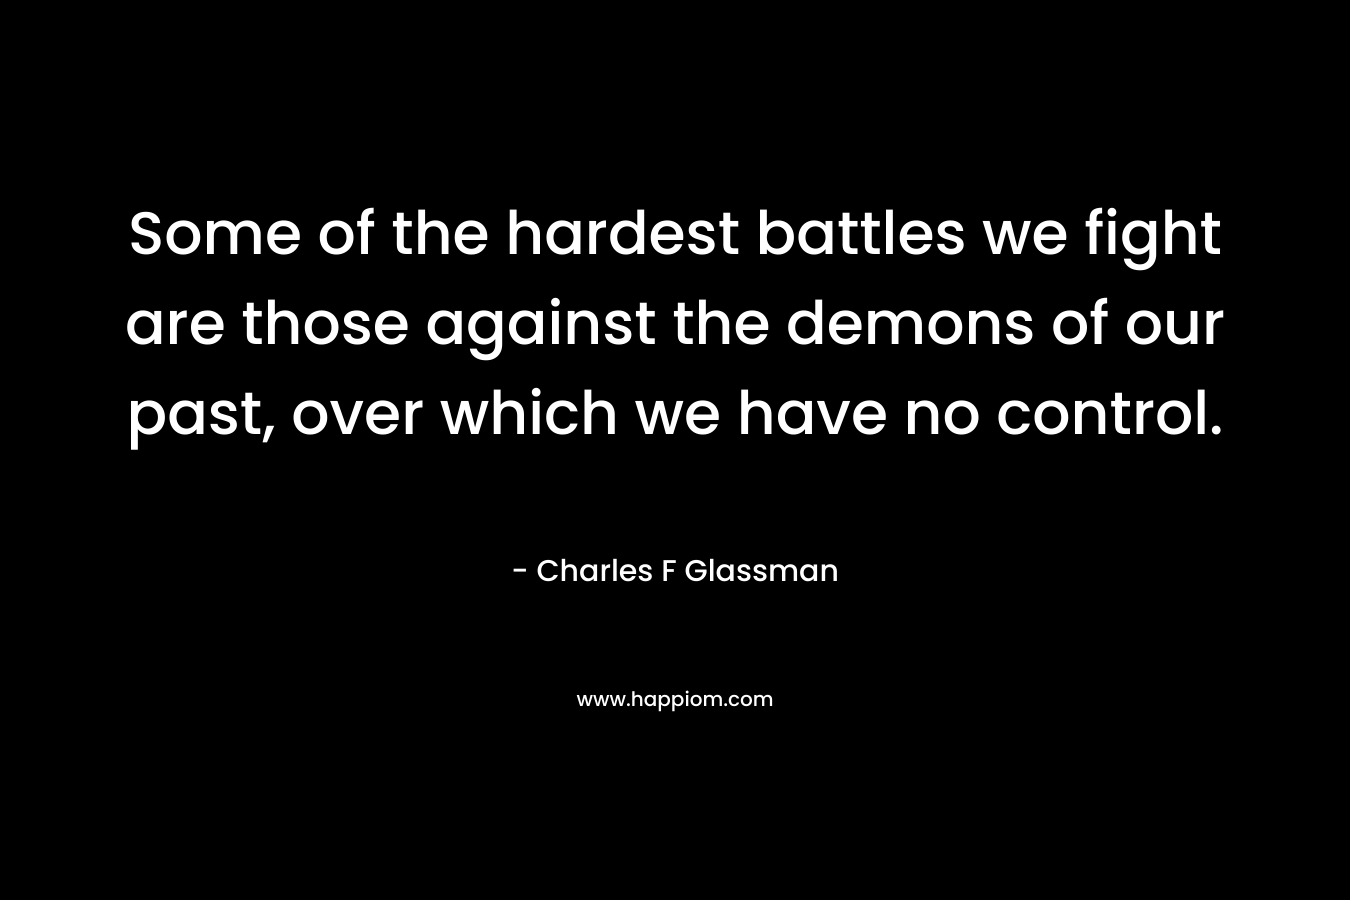 Some of the hardest battles we fight are those against the demons of our past, over which we have no control. – Charles F Glassman